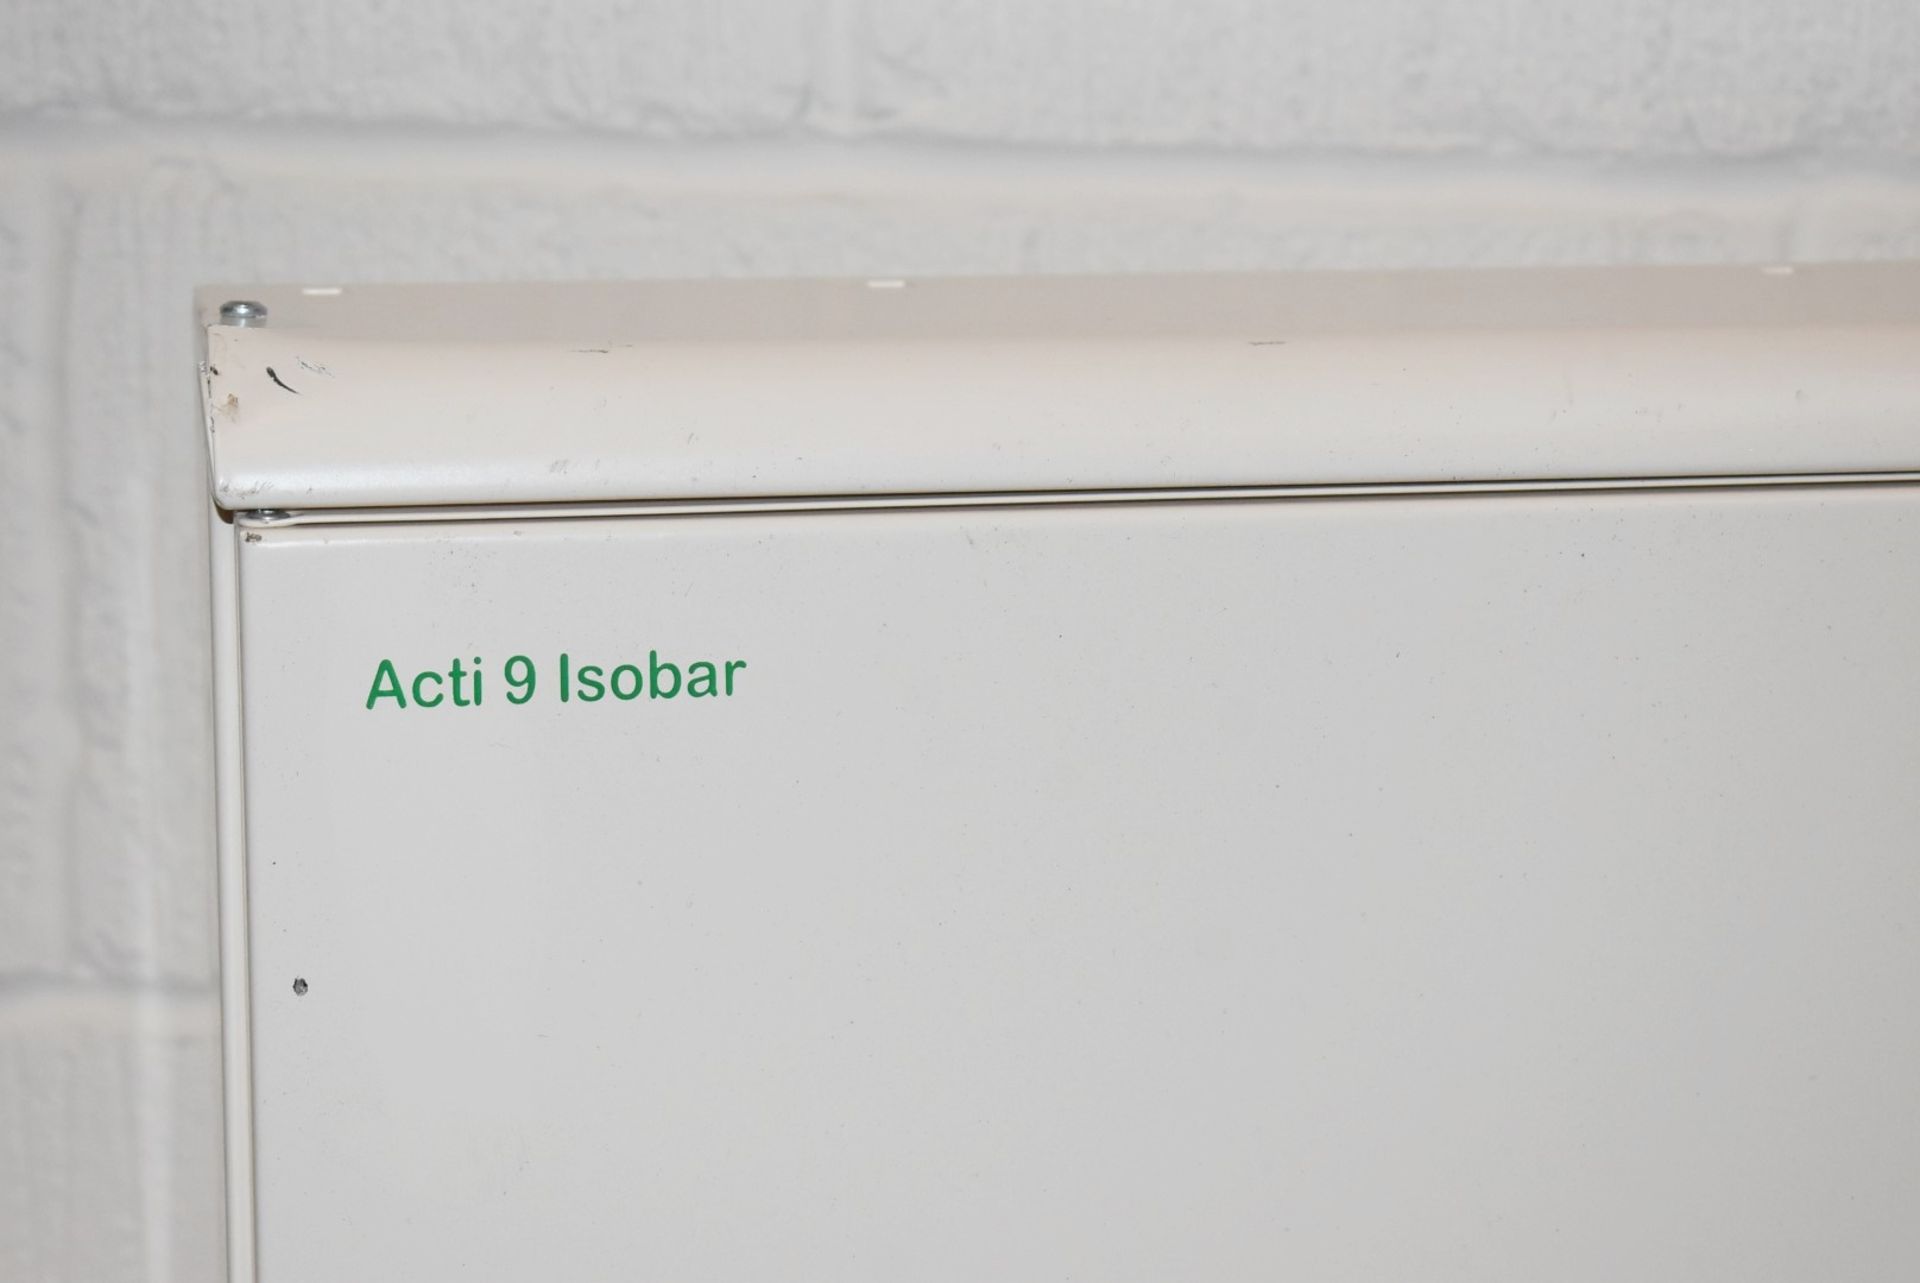 1 x Schneider Acti 9 Isobar Fuse Box - Unused - Size W47 x H47 cms - CL717 - Ref: GCA250 WH5 - - Image 3 of 8